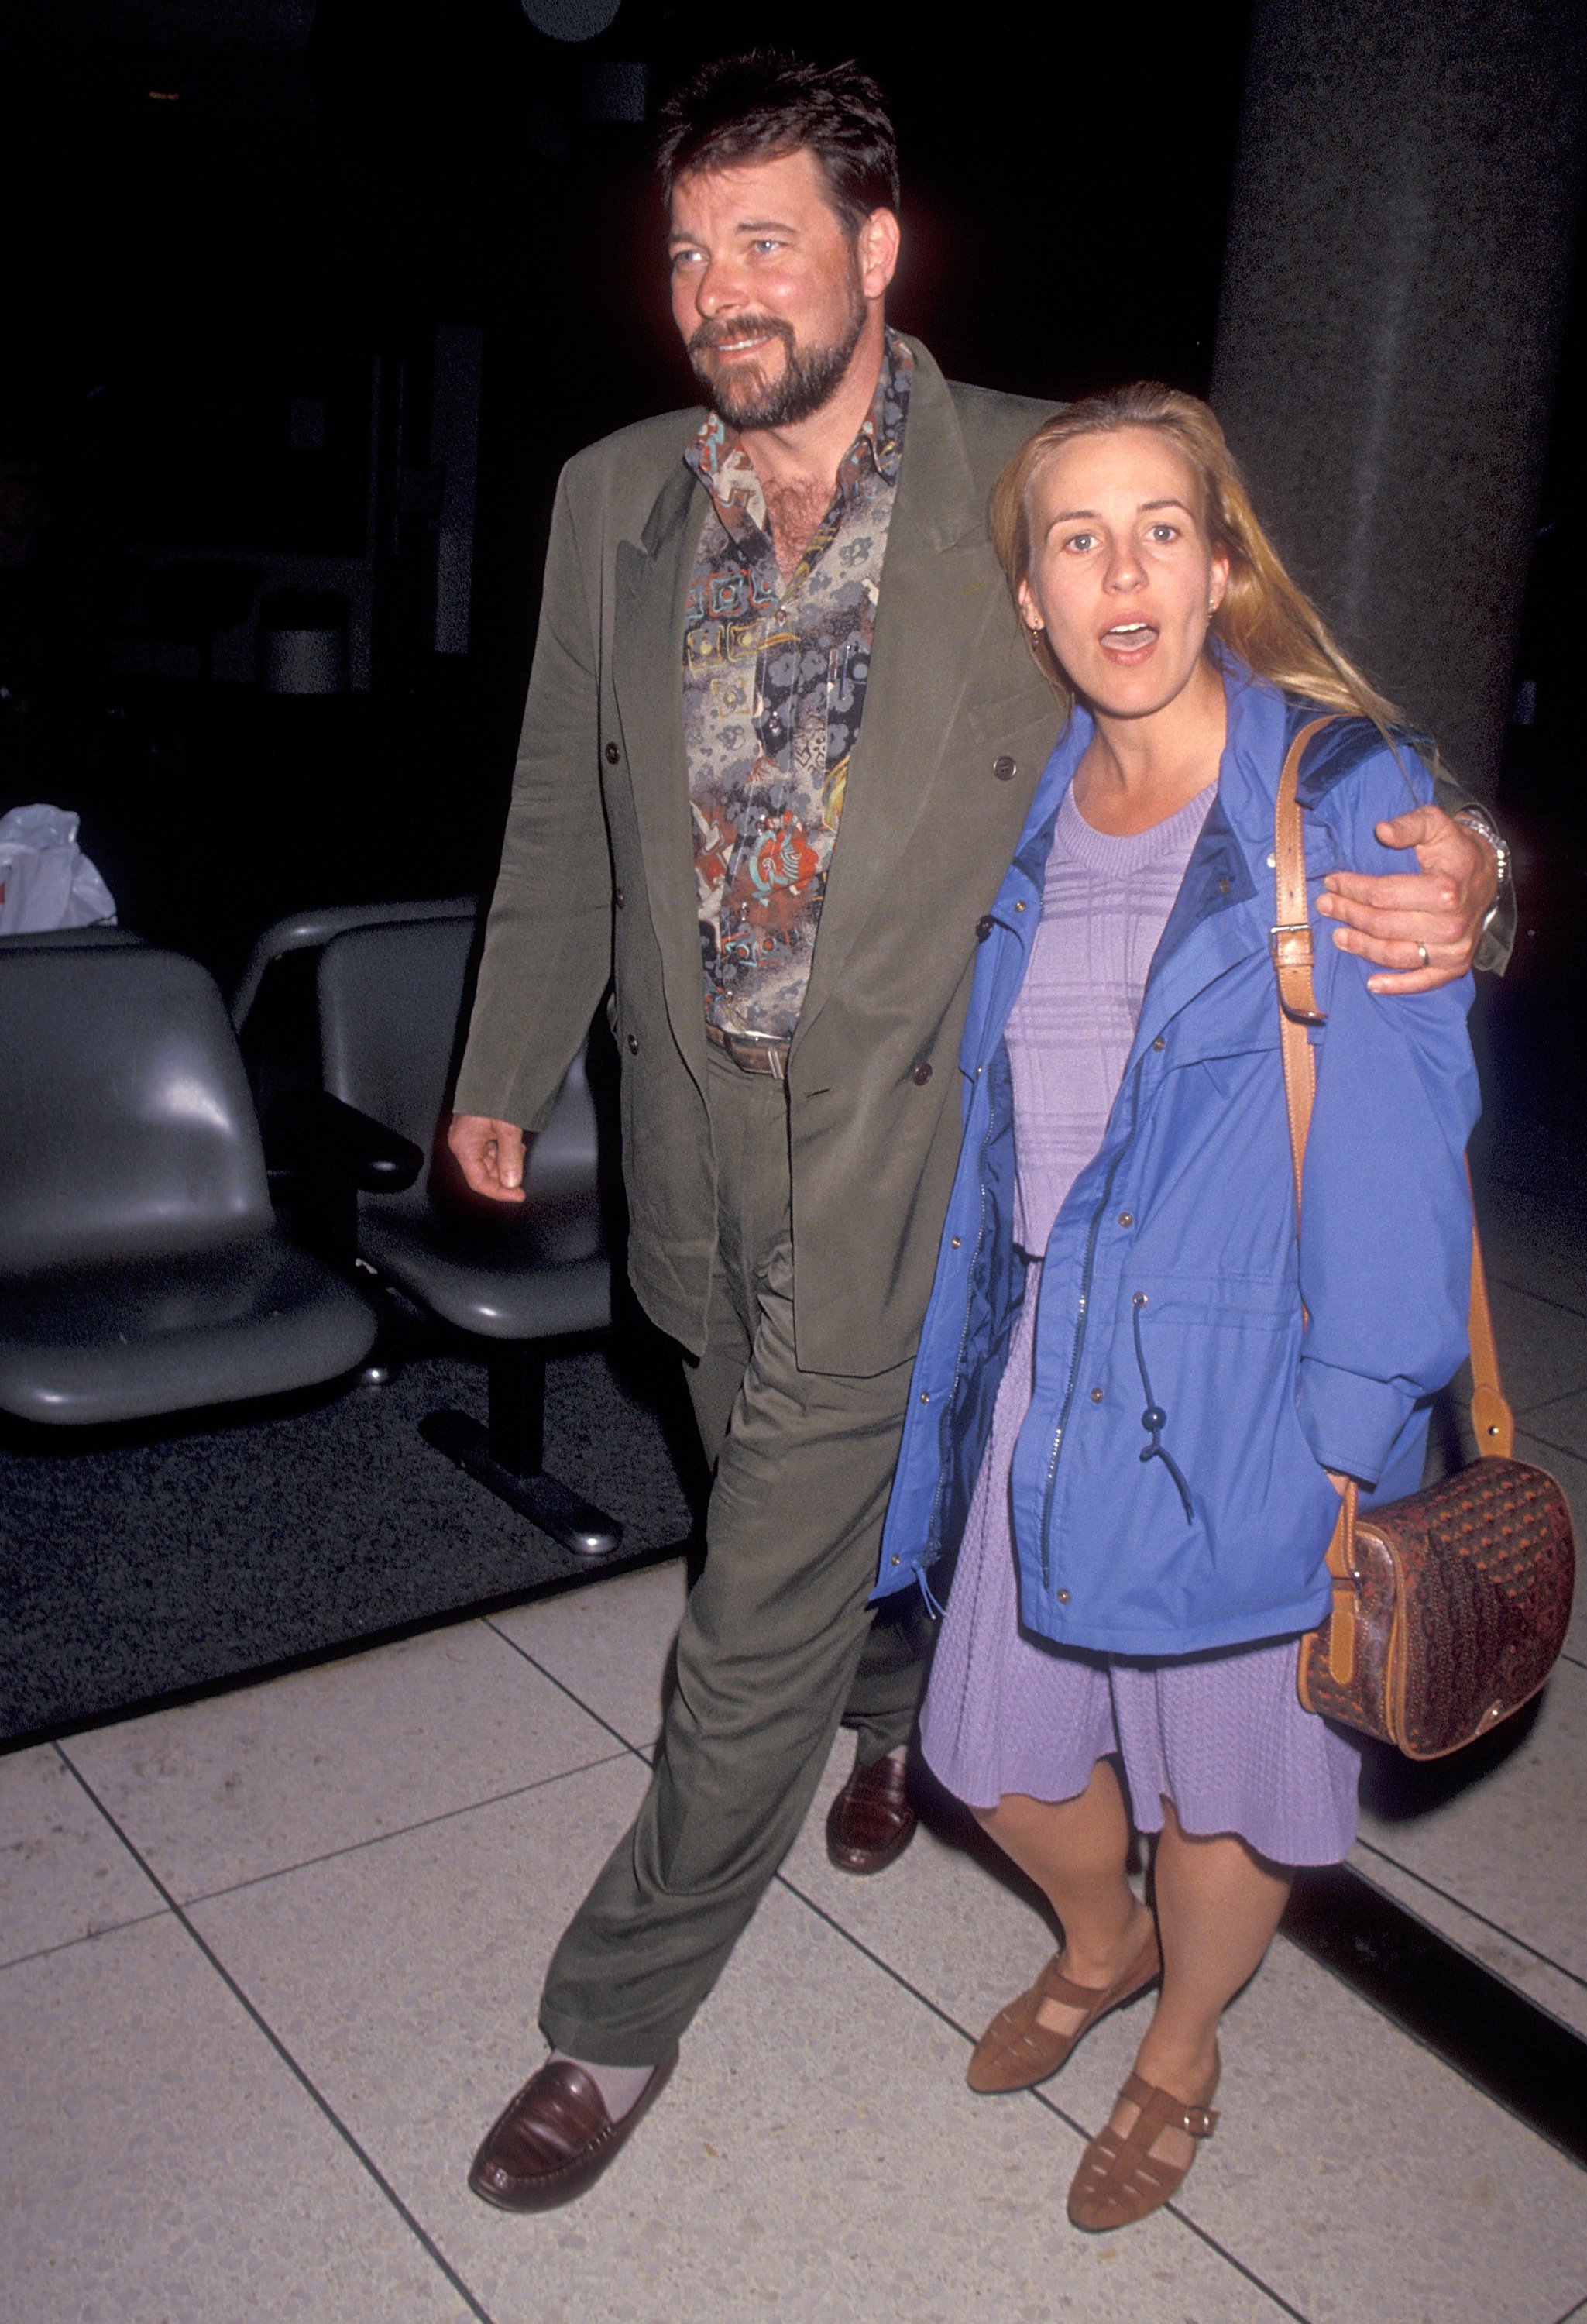 Jonathan Frakes and Genie Francis on January 2, 1994, at the Los Angeles International Airport in Los Angeles, California. | Source: Ron Galella, Ltd./Ron Galella Collection/Getty Images